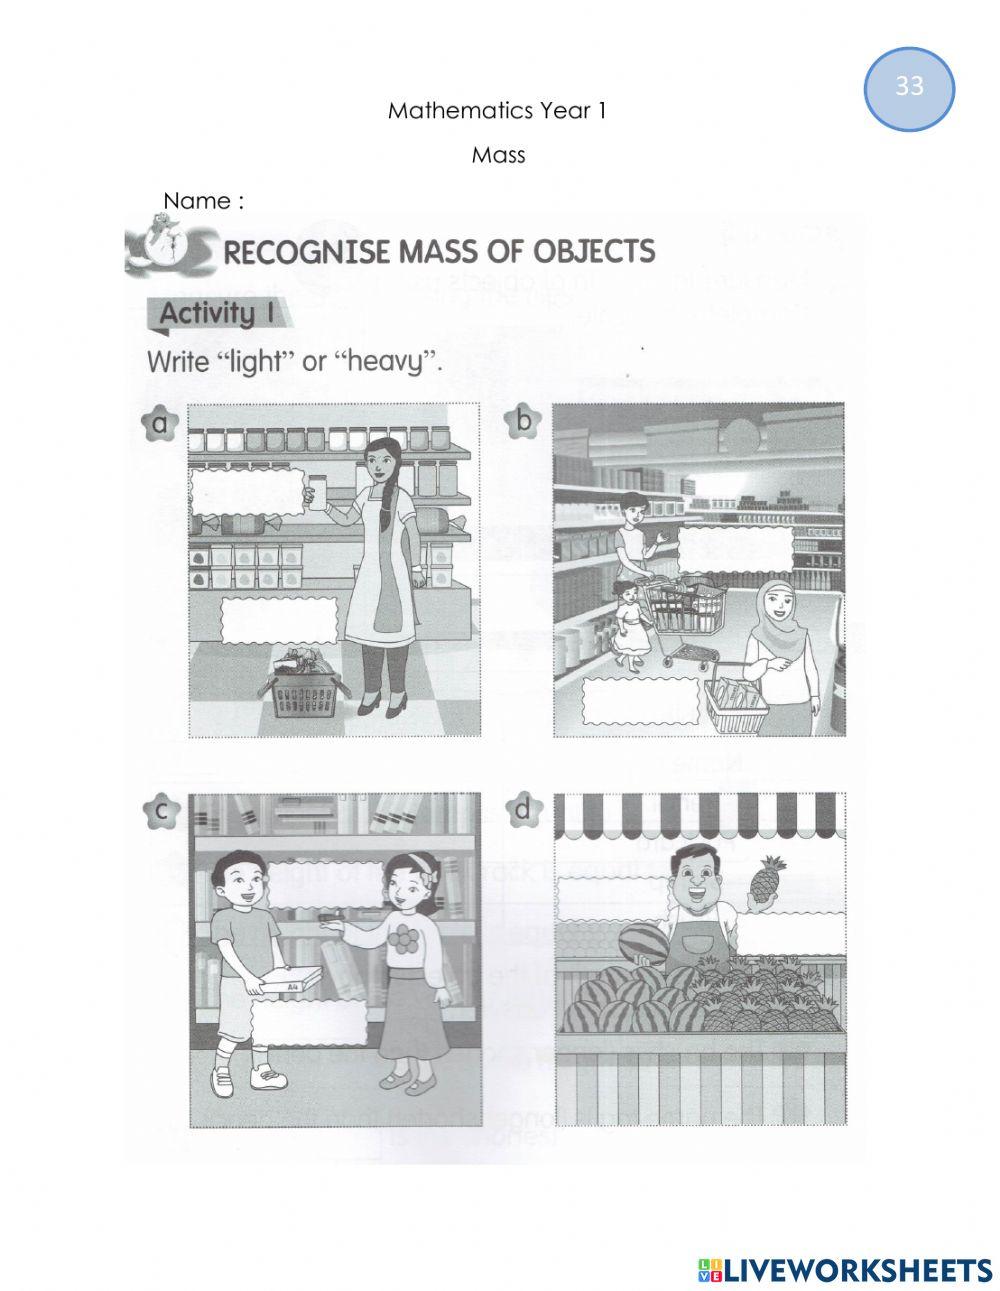 Recognise mass of objects